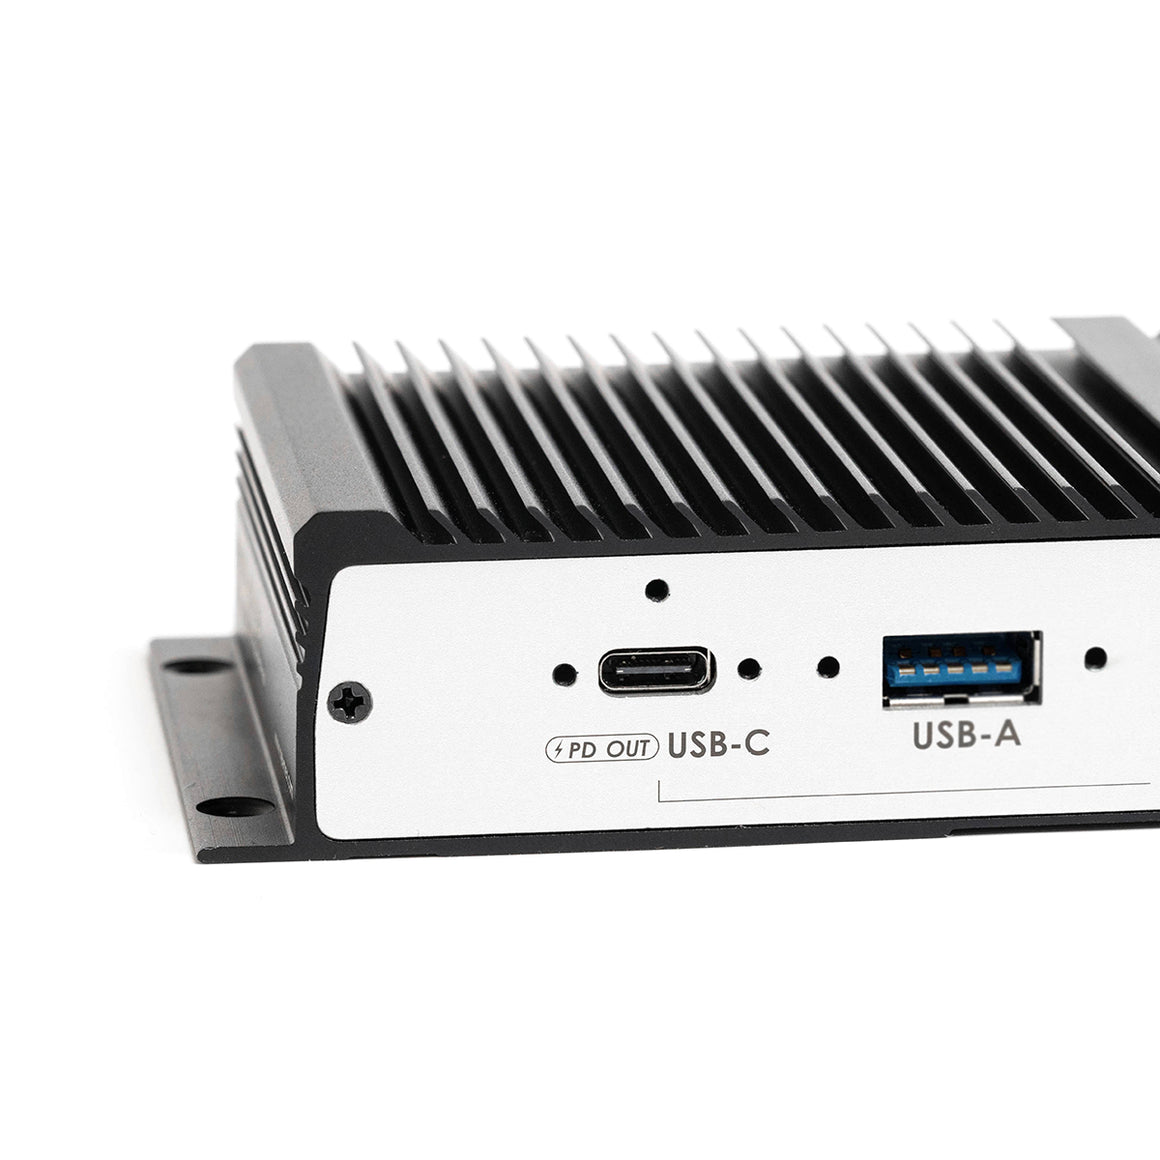 FIRENEX-UHUB-10G USB-C 10Gbps 7-Port Industrial Hub with Power Delivery